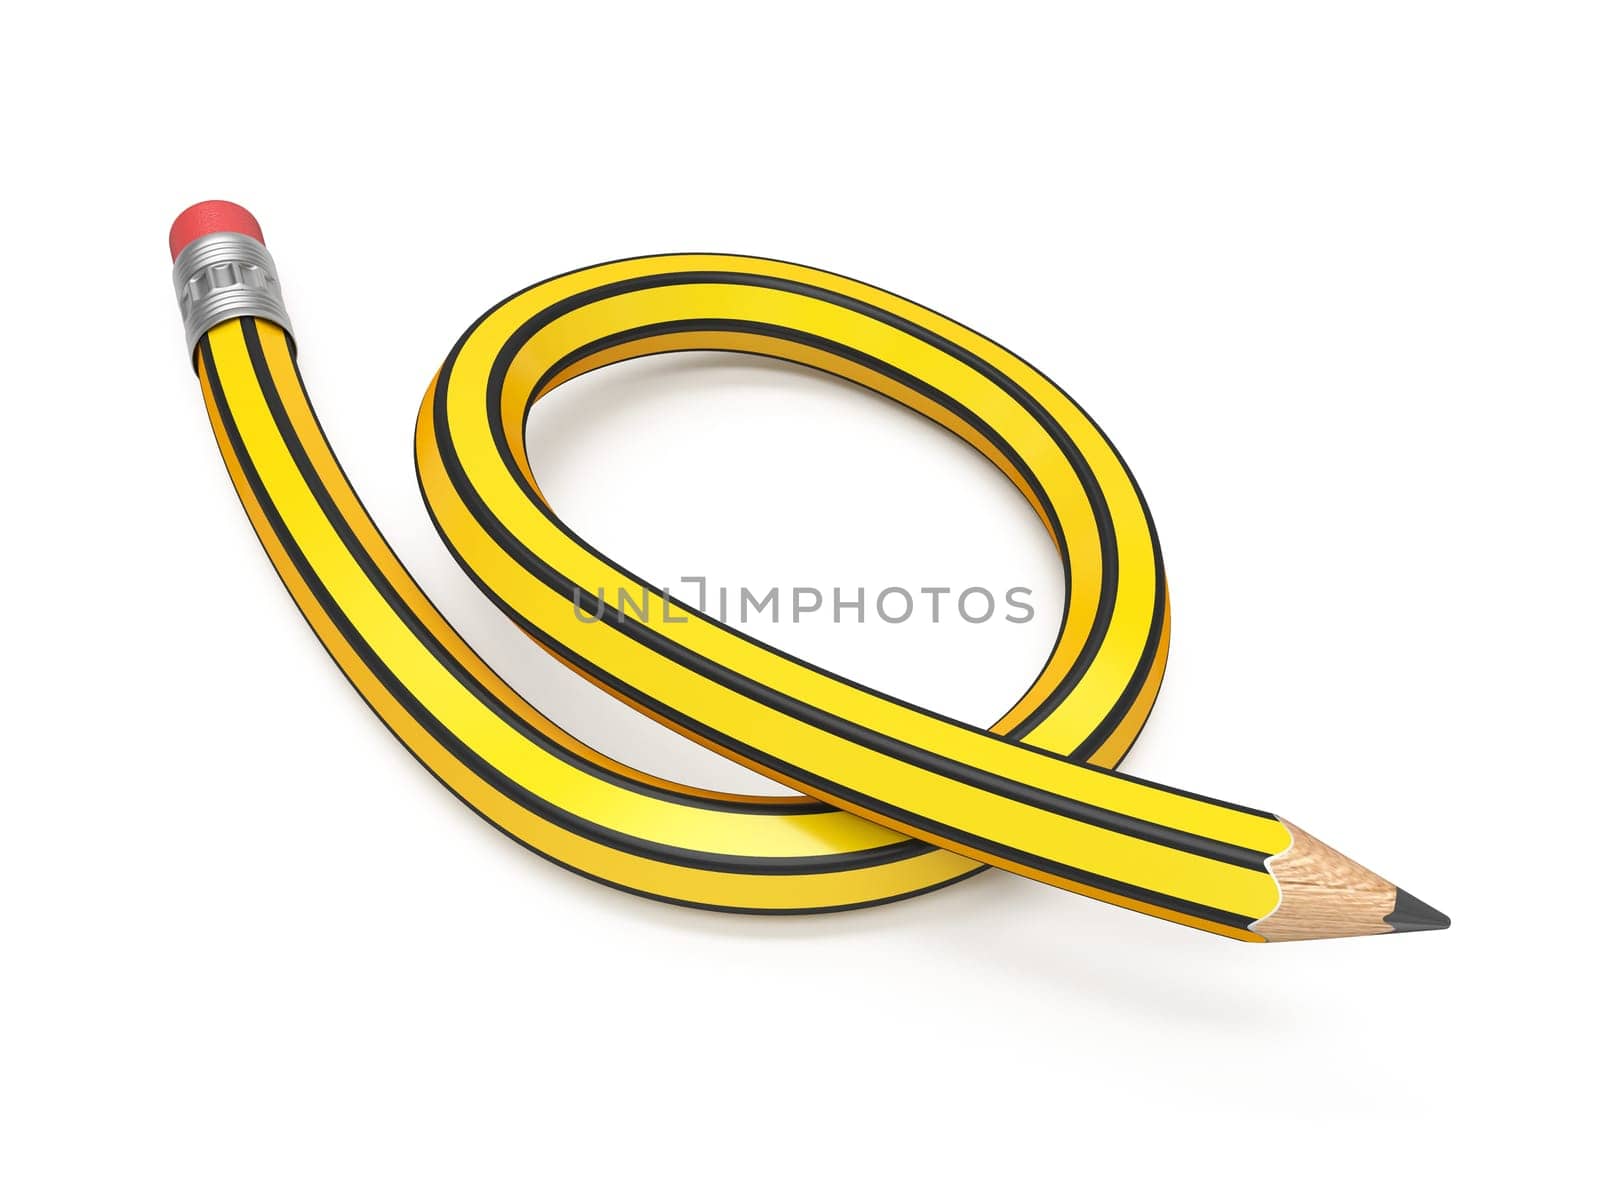 Bent pencil 3D rendering illustration isolated on white background